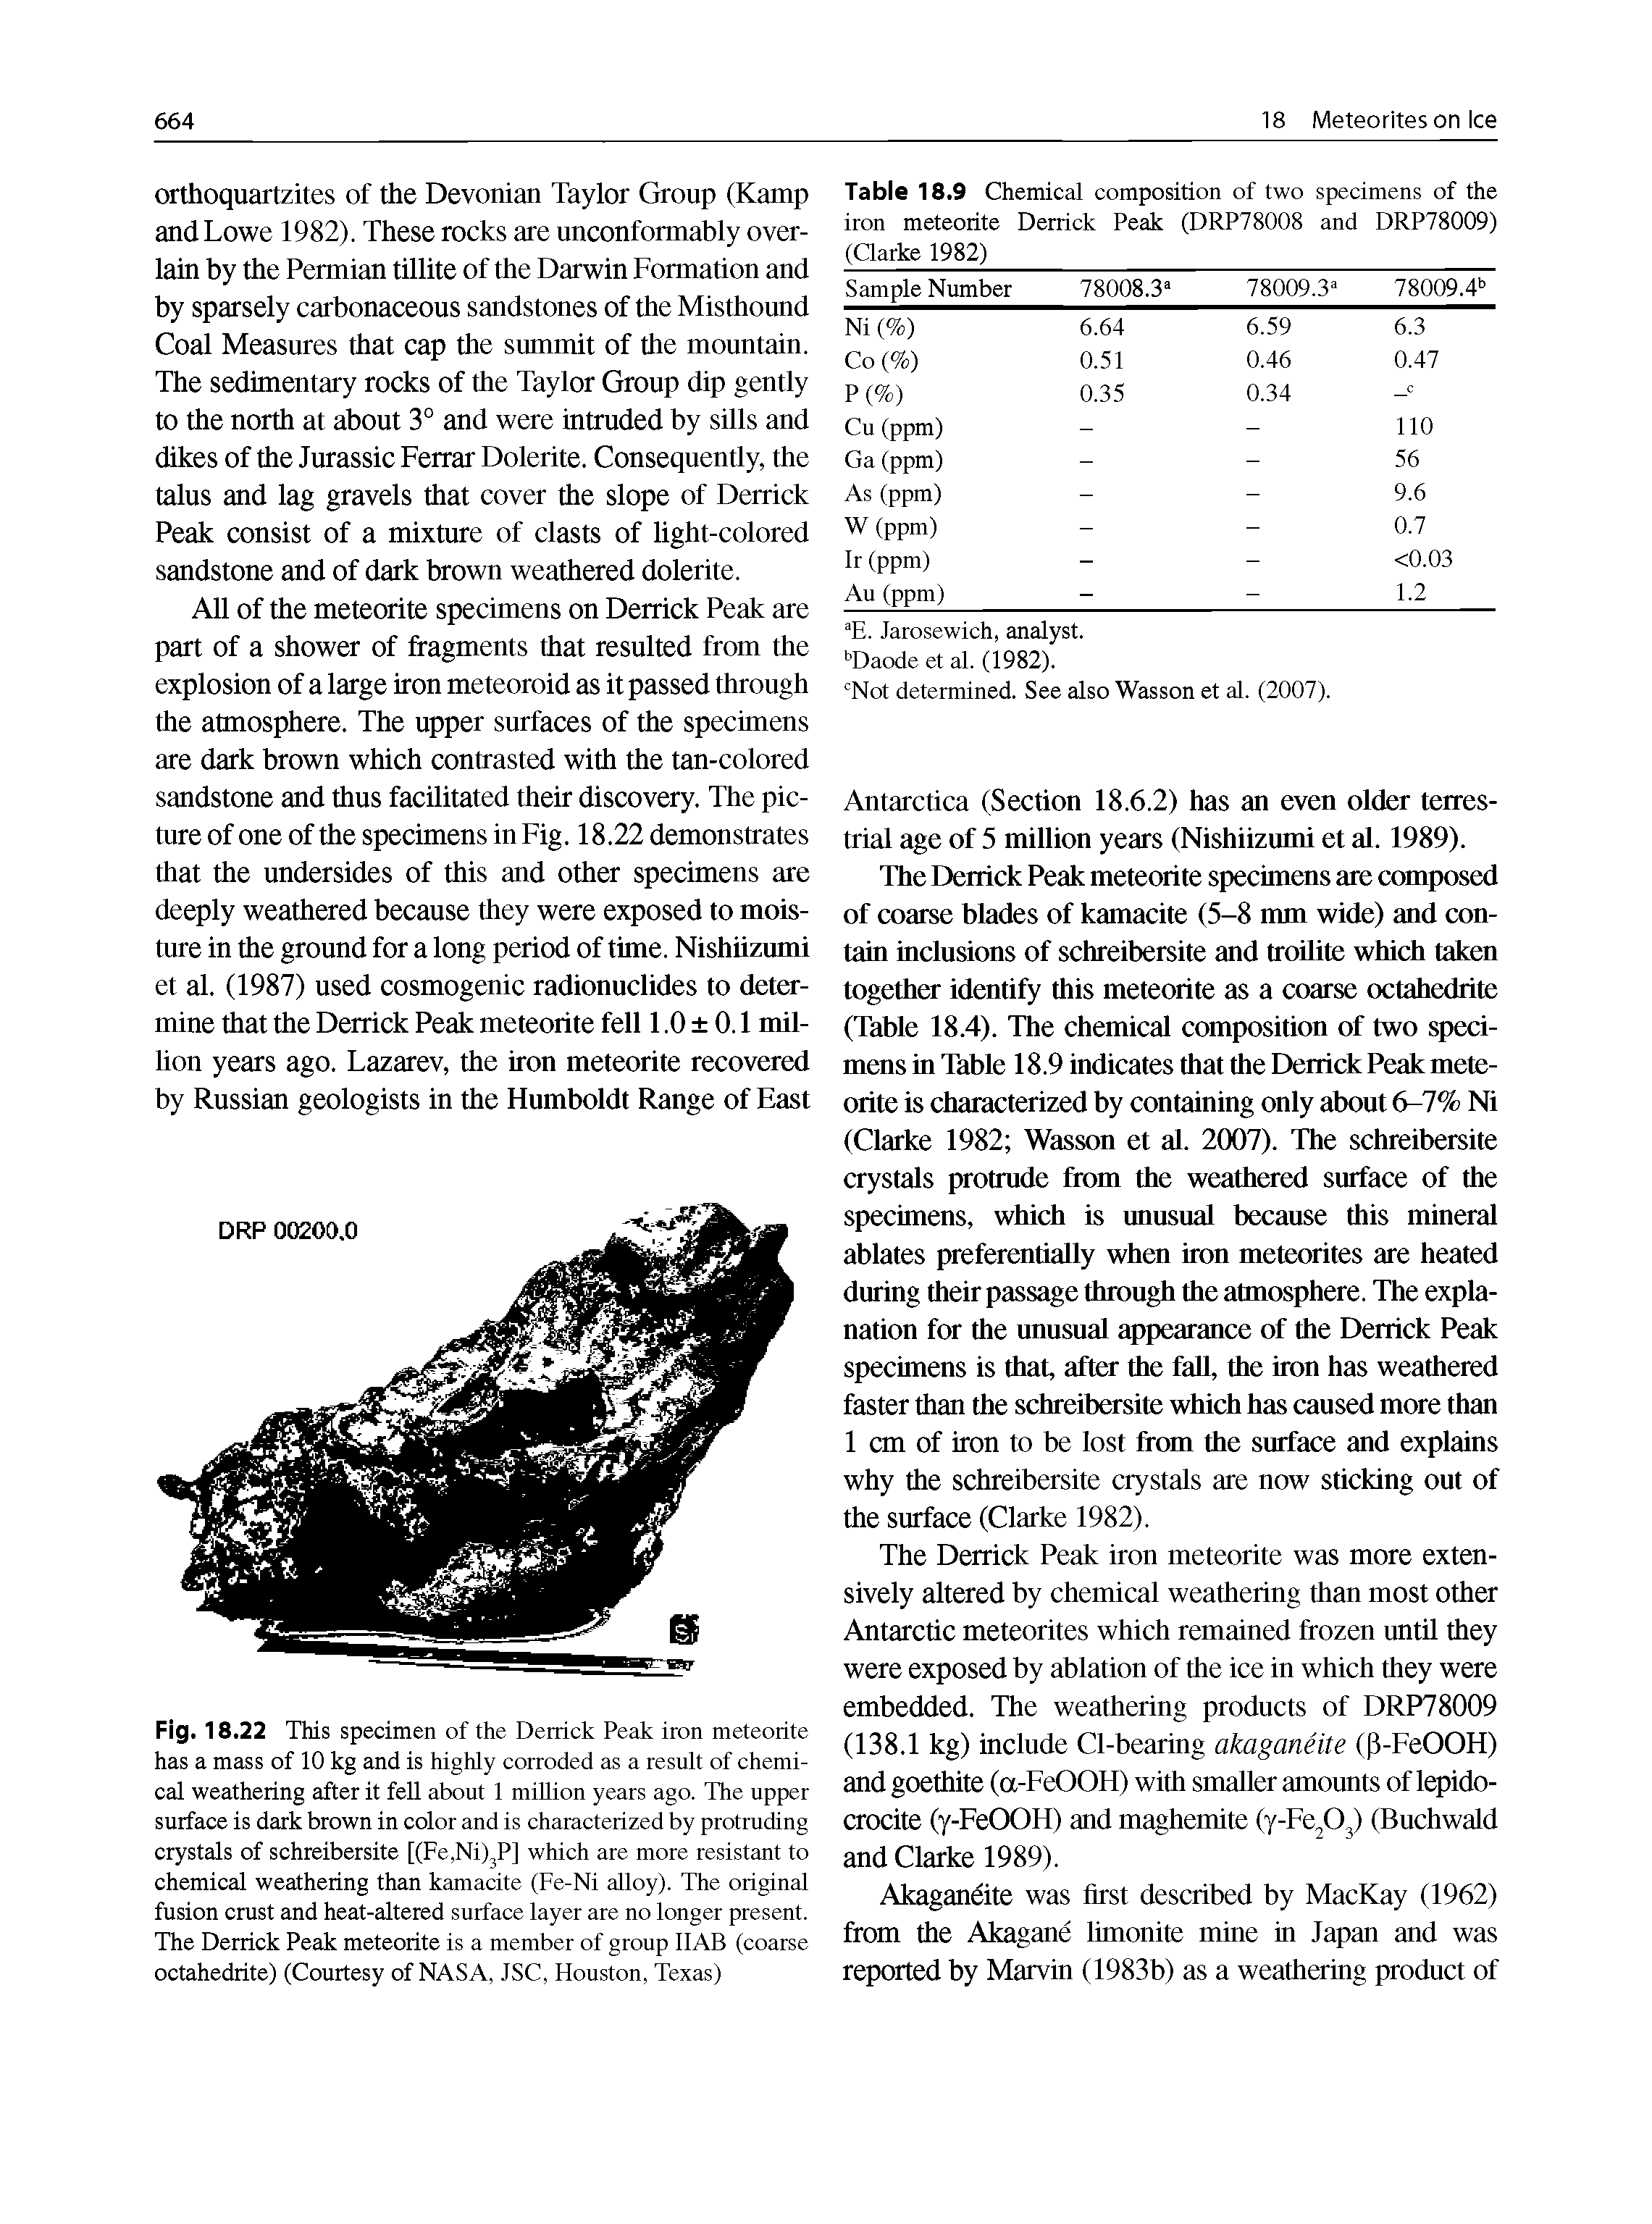 Fig. 18.22 This specimen of the Derrick Peak iron meteorite has a mass of 10 kg and is highly corroded as a result of chemical weathering after it fell about 1 million years ago. The upper surface is dark brown in color and is characterized by protruding crystals of schreibersite [(Fe.NiljP] which are more resistant to chemical weathering than kamacite (Fe-Ni alloy). The original fusion crust and heat-altered surface layer are no longer present. The Derrick Peak meteorite is a member of group IlAB (coarse octahedrite) (Courtesy of NASA, JSC, Houston, Texas)...